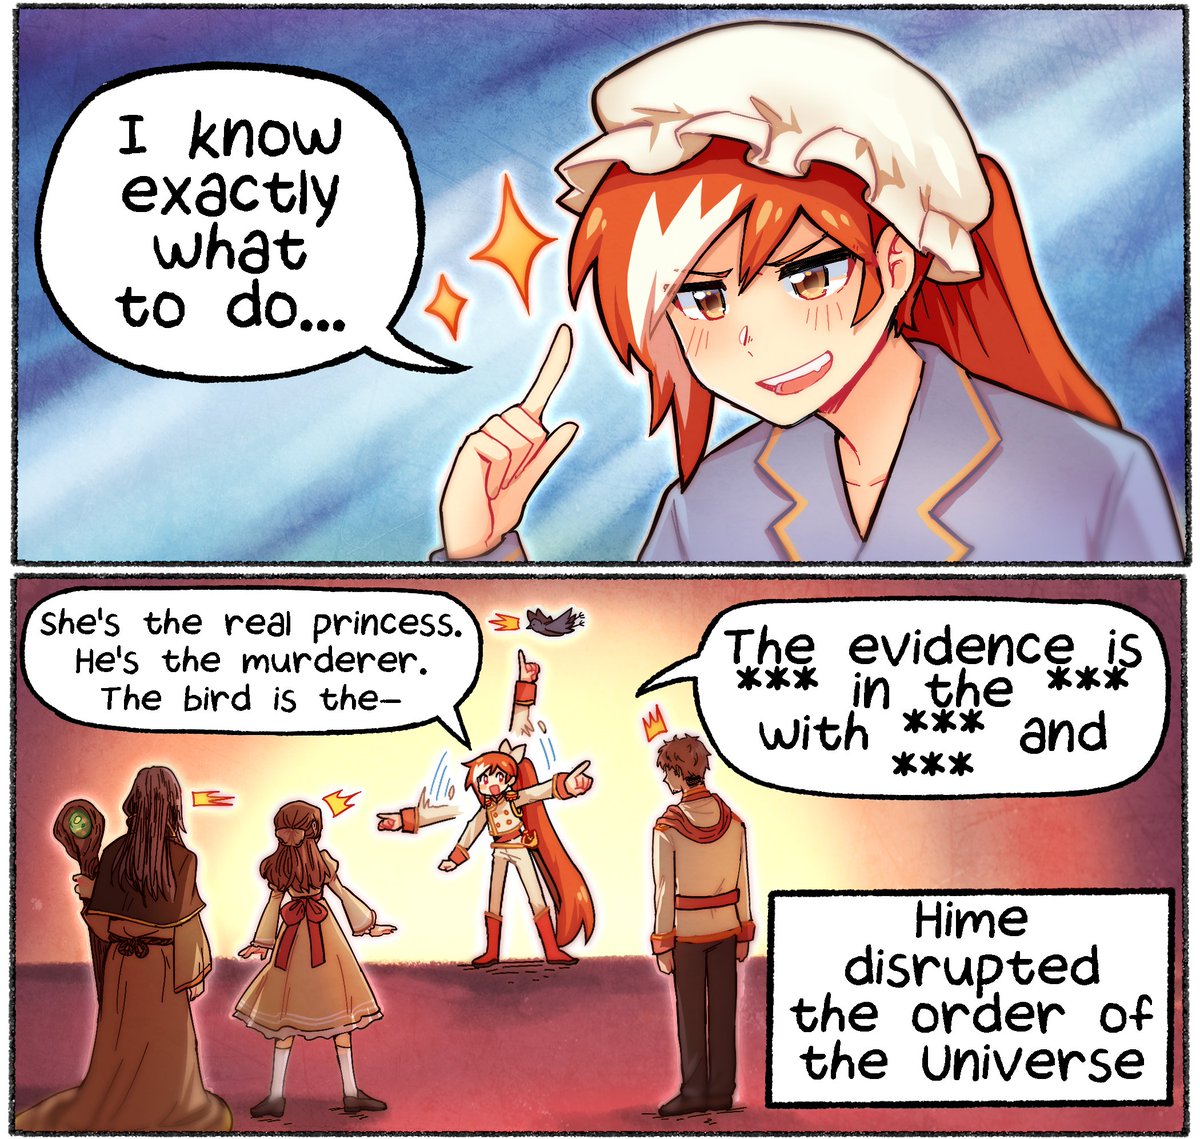 In today's edition of 'The Daily Life of Crunchyroll-Hime' (by @coughdrops!!) ✨ Hime takes her anime skills and puts them to good use 😅